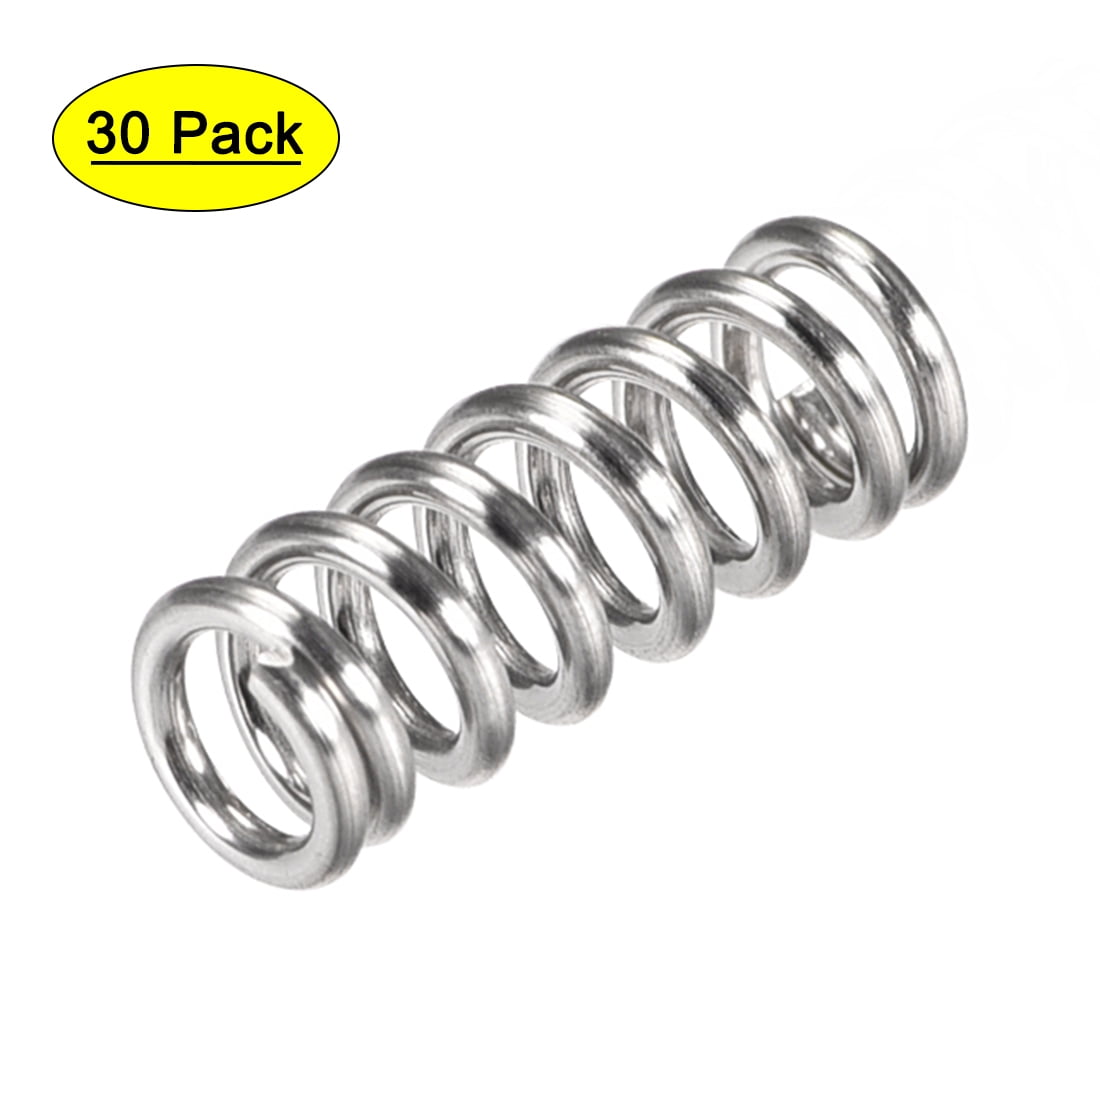 4 x Compression Springs Size 6mm Diameter 15mm Length long W/D 0.5 Small S/S 